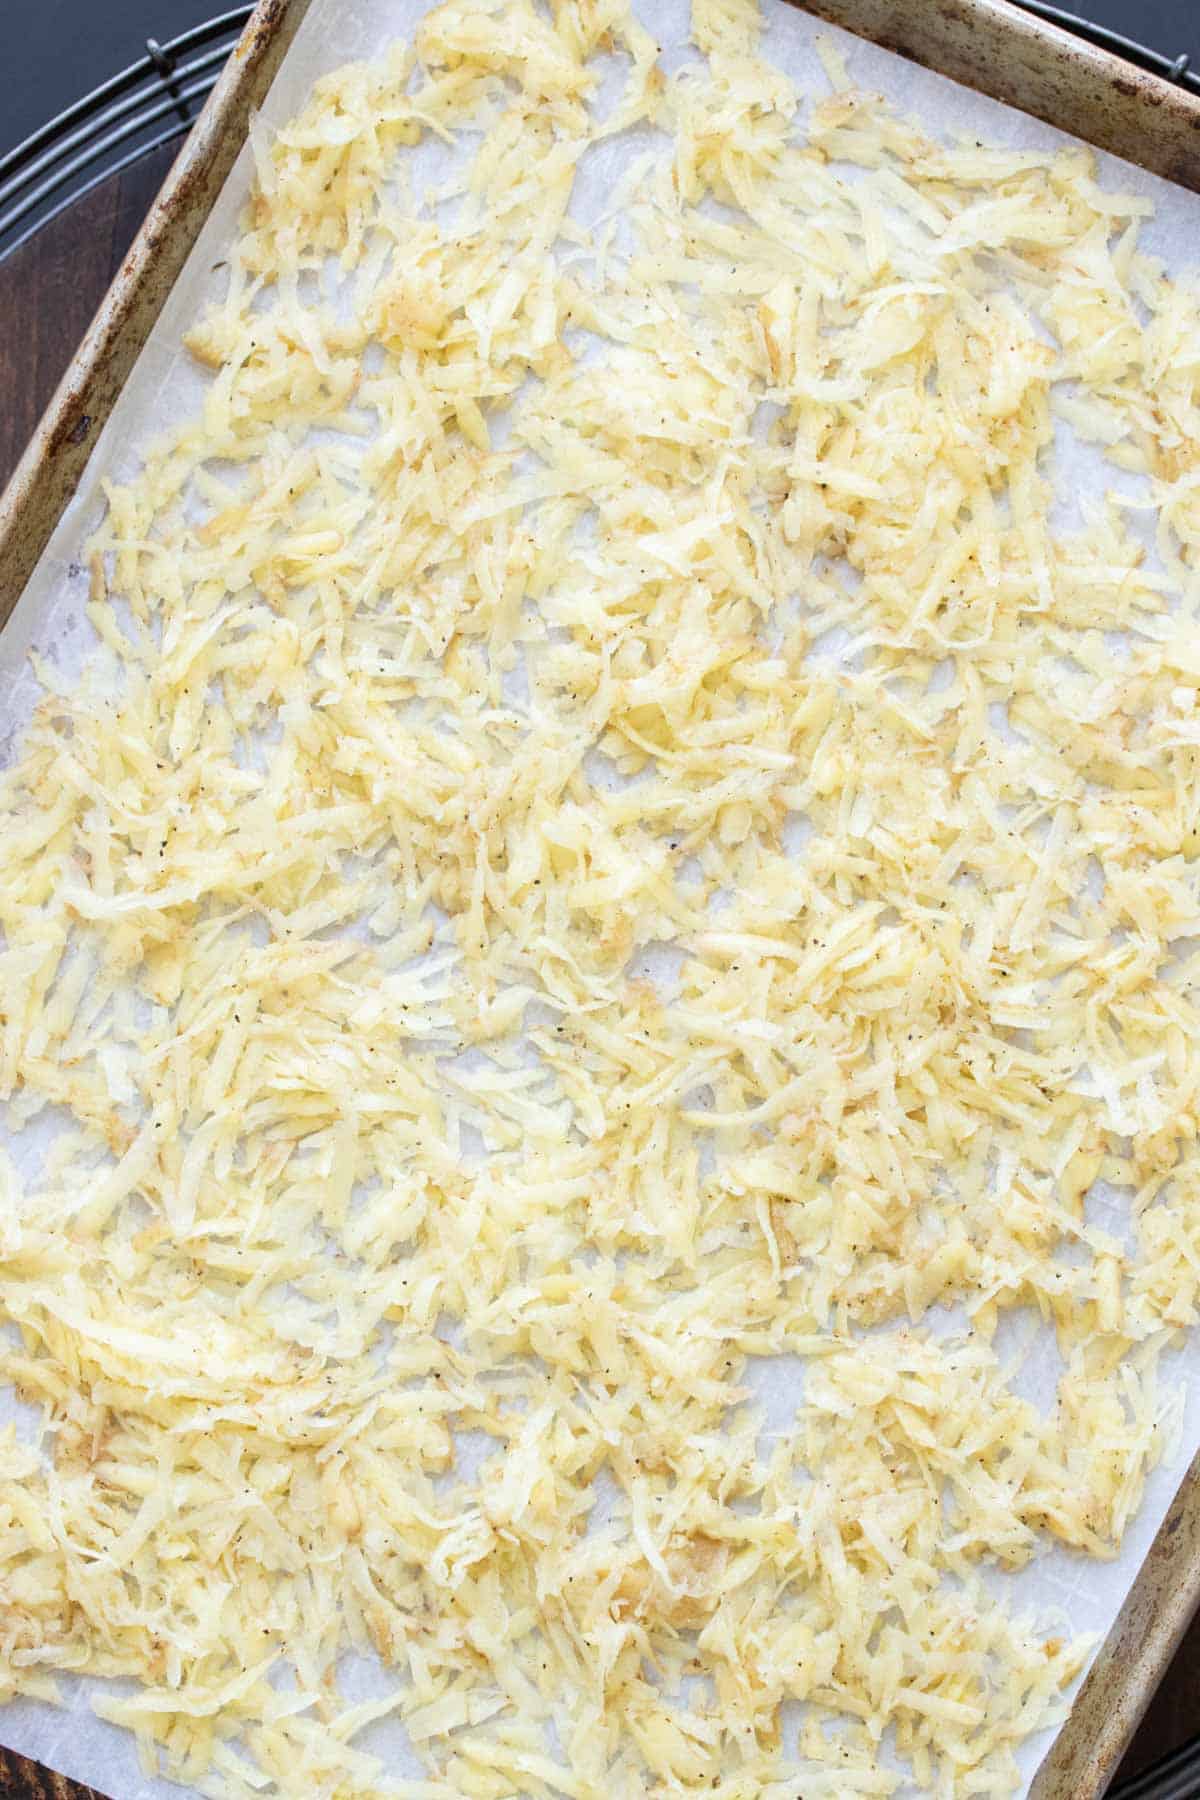 Shredded raw potato spread out on a parchment lined baking sheet